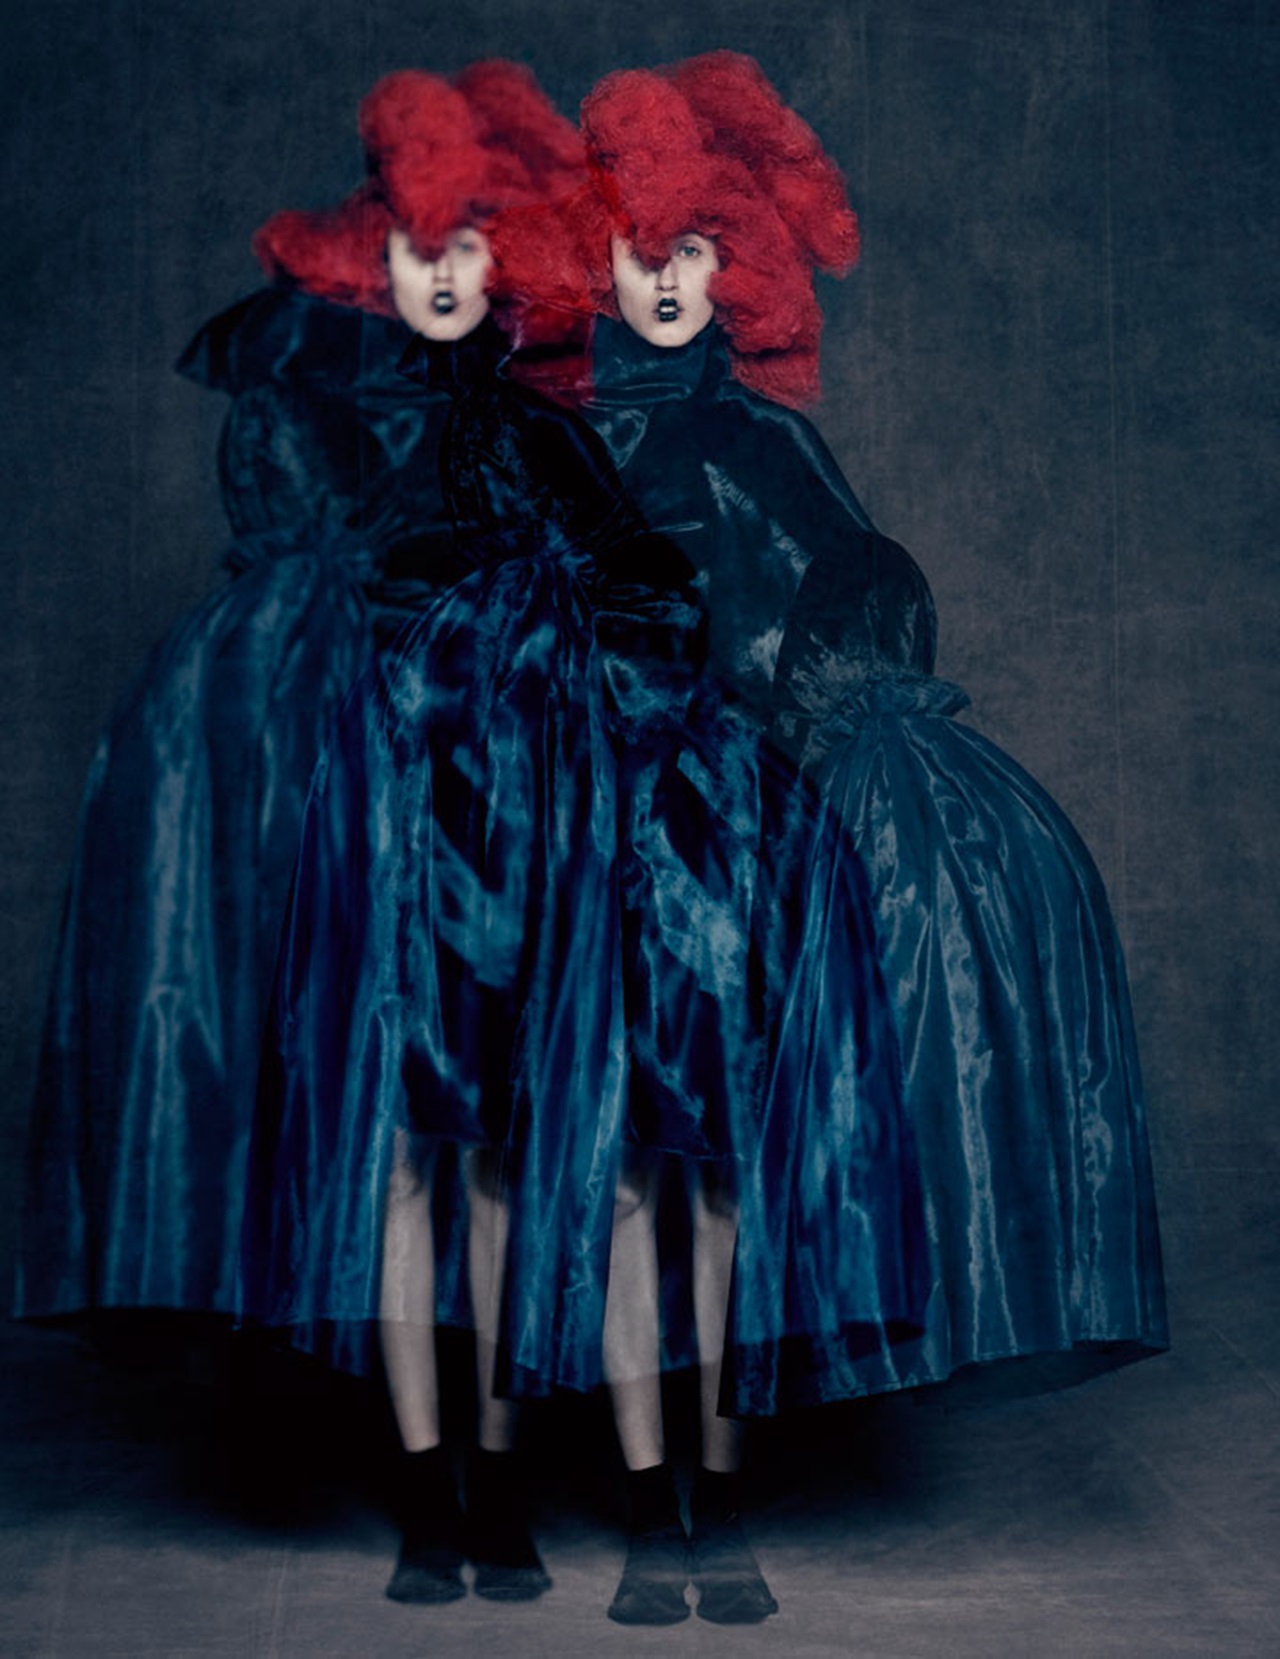 Rei Kawakubo (Japanese, born 1942) for Comme des Garçons (Japanese, founded 1969). Blue Witch, spring/summer 2016; Courtesy of Comme des Garçons. Photograph by © Paolo Roversi